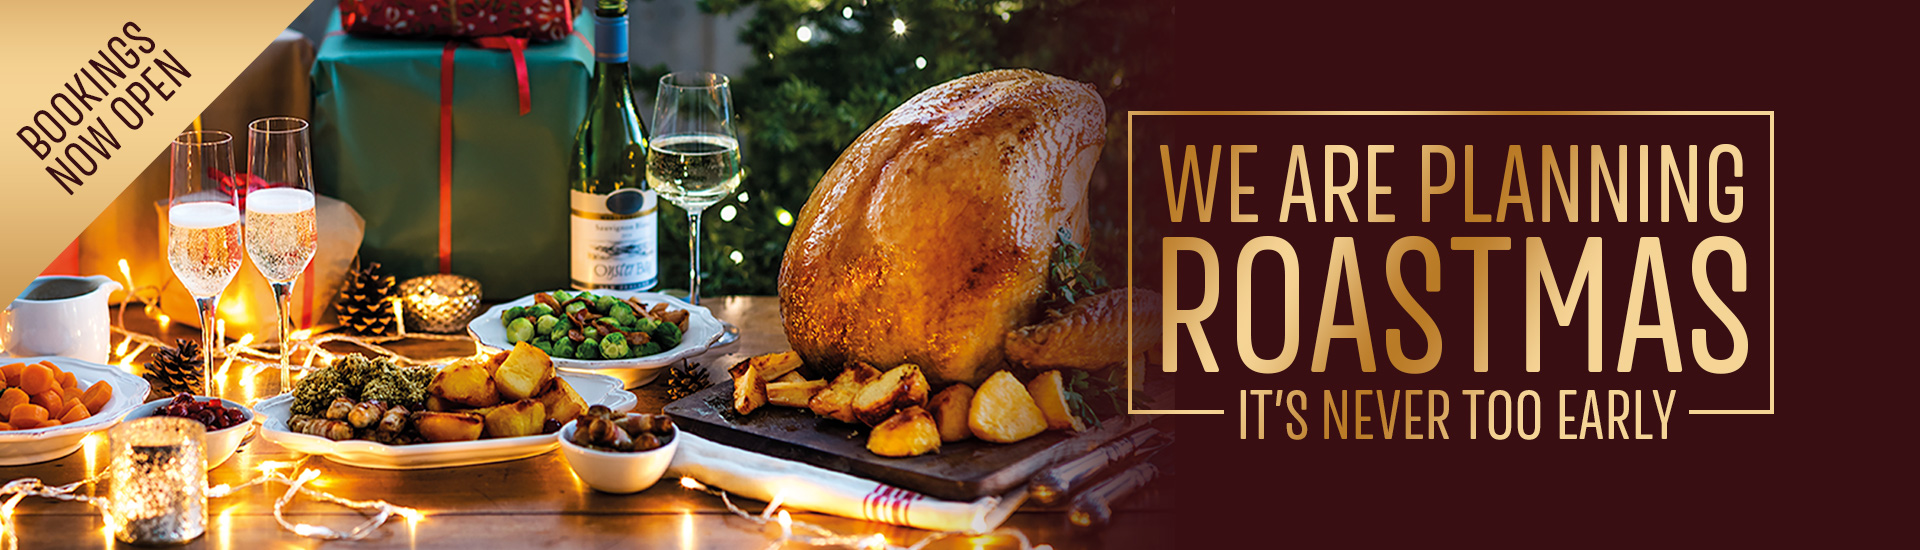 Christmas 2022 at your local Toby Carvery Telford | Home of the Roast